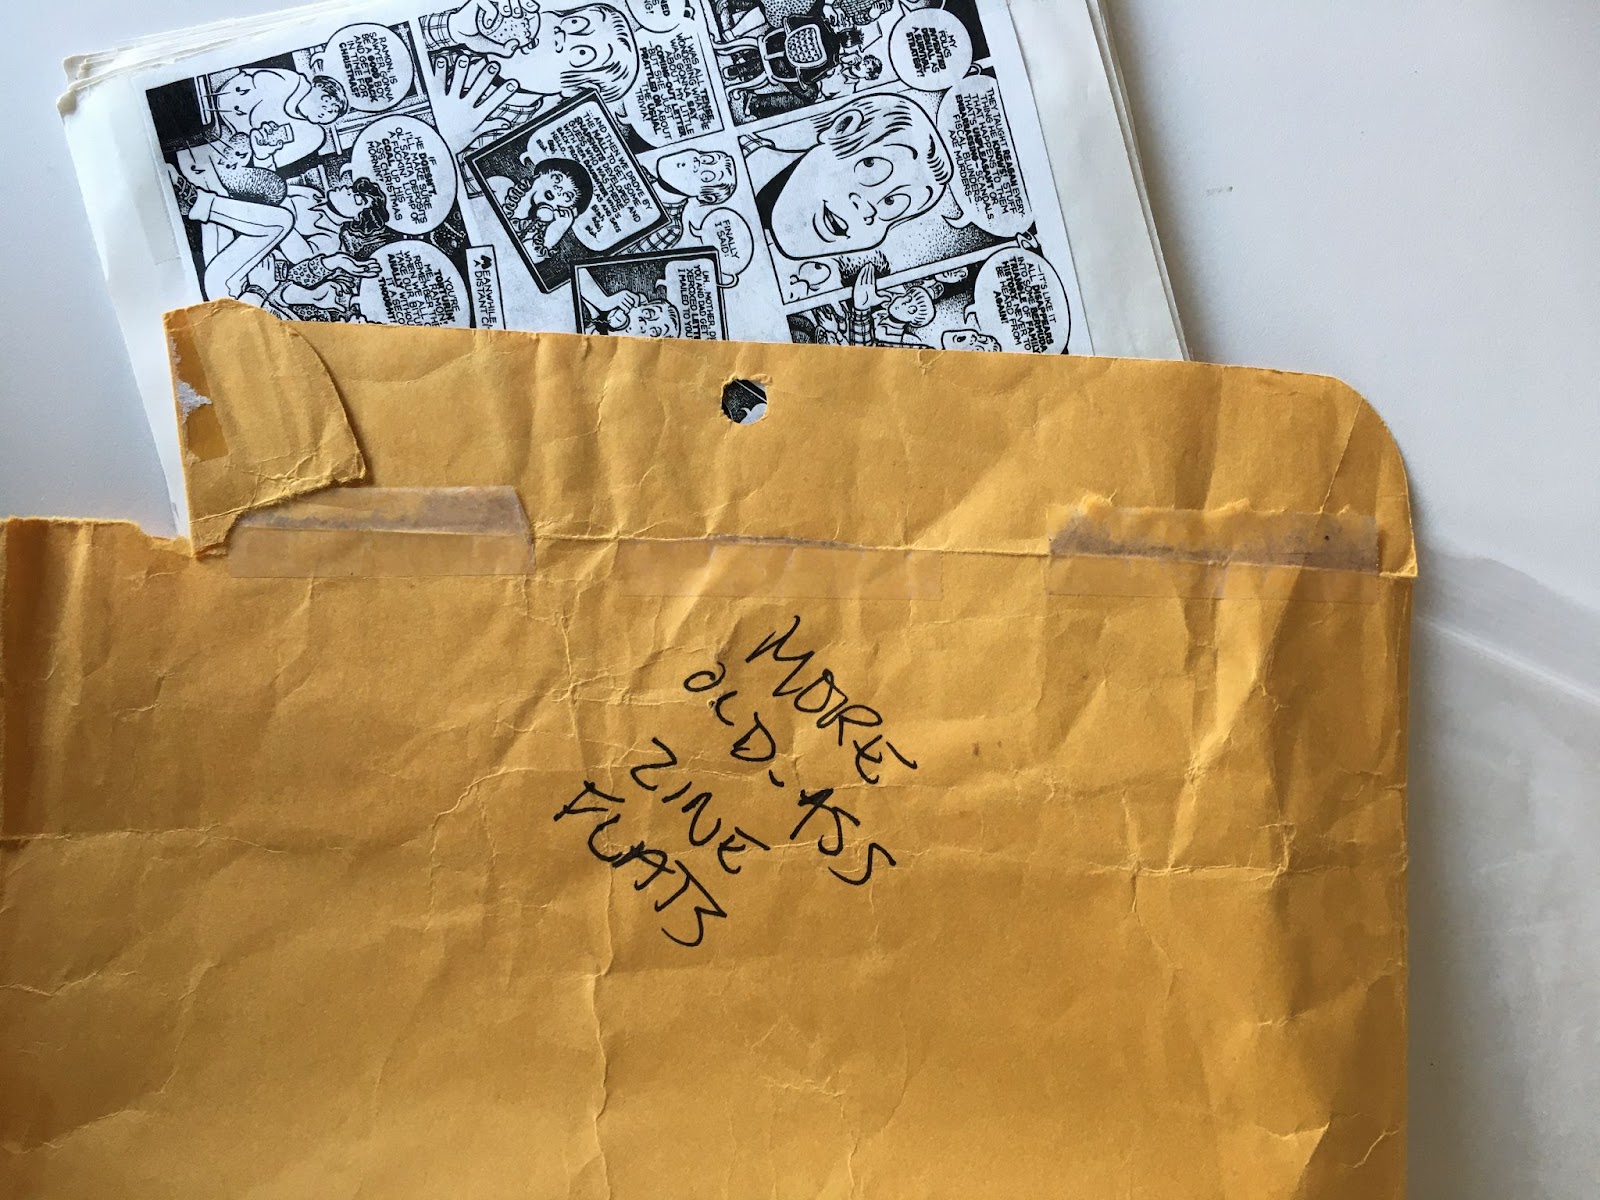 photo of a mailing envelope with a zine sticking out and text on the envelope "More old ass zine flats"